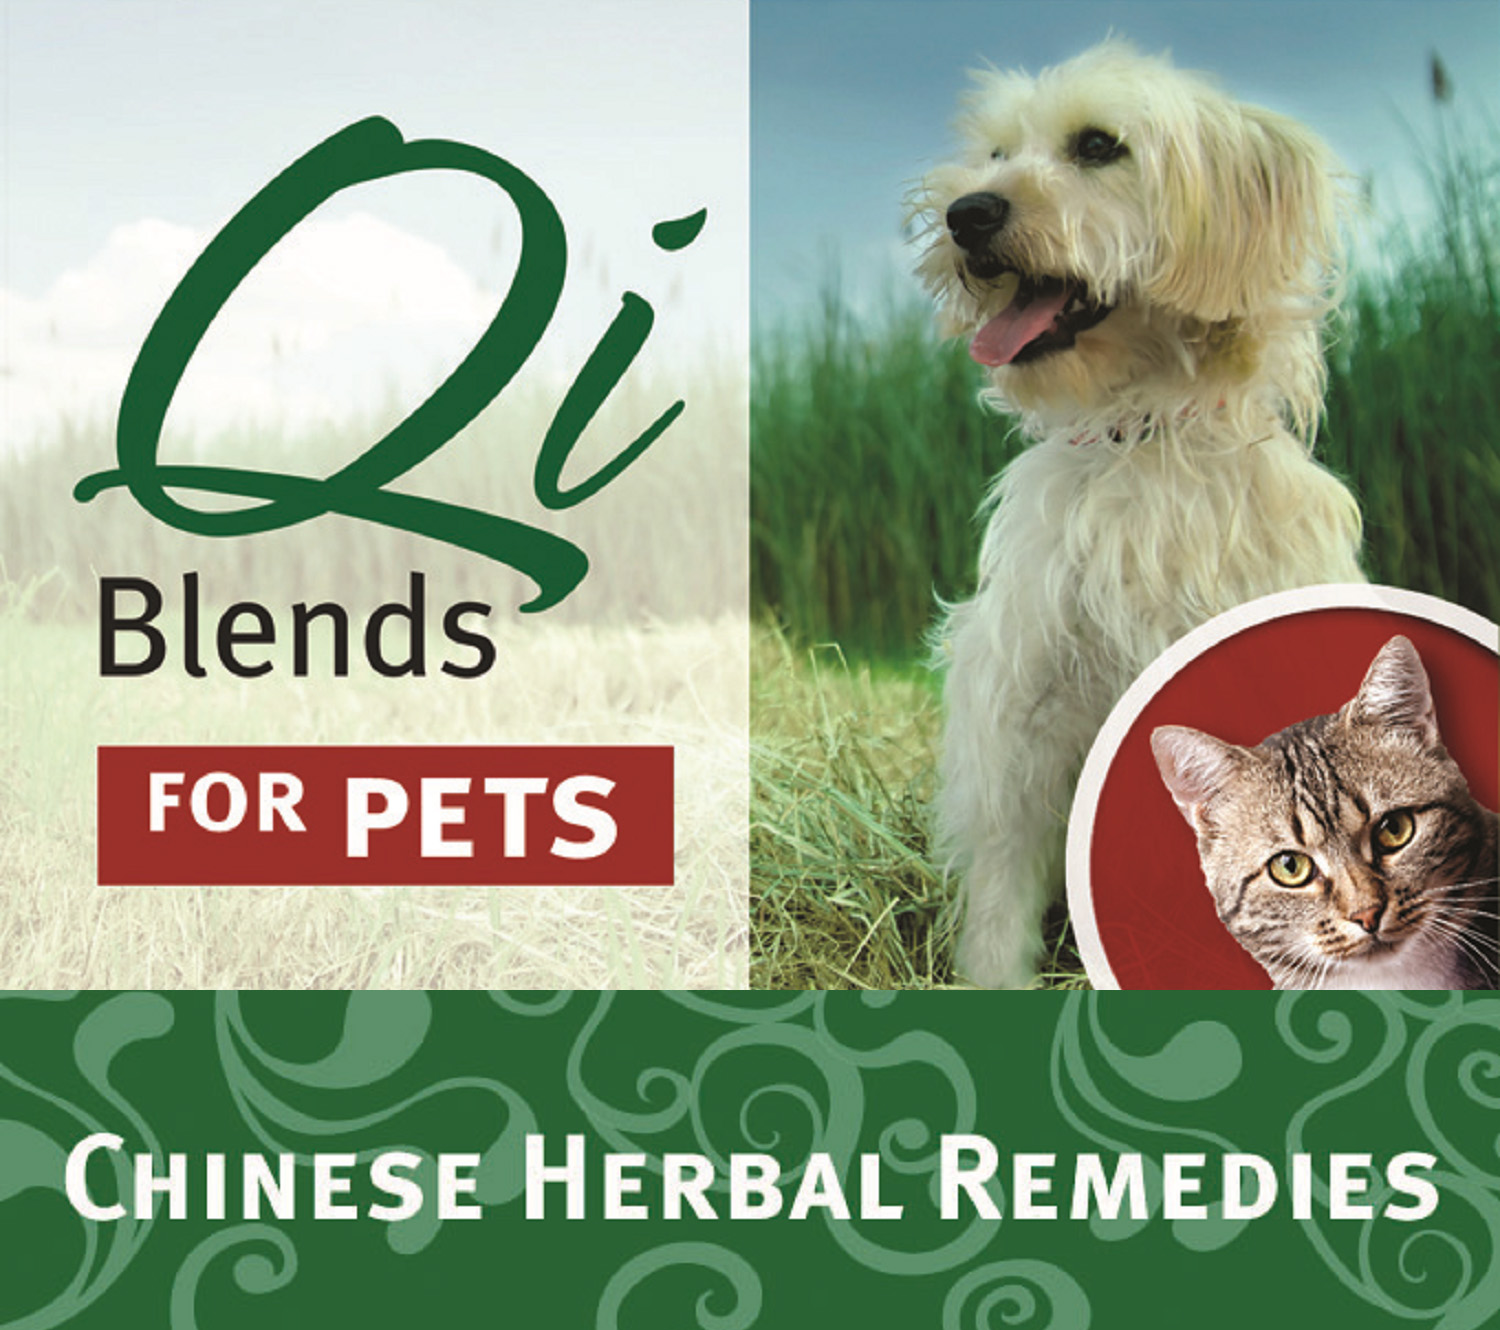 Qi Blends for Pets